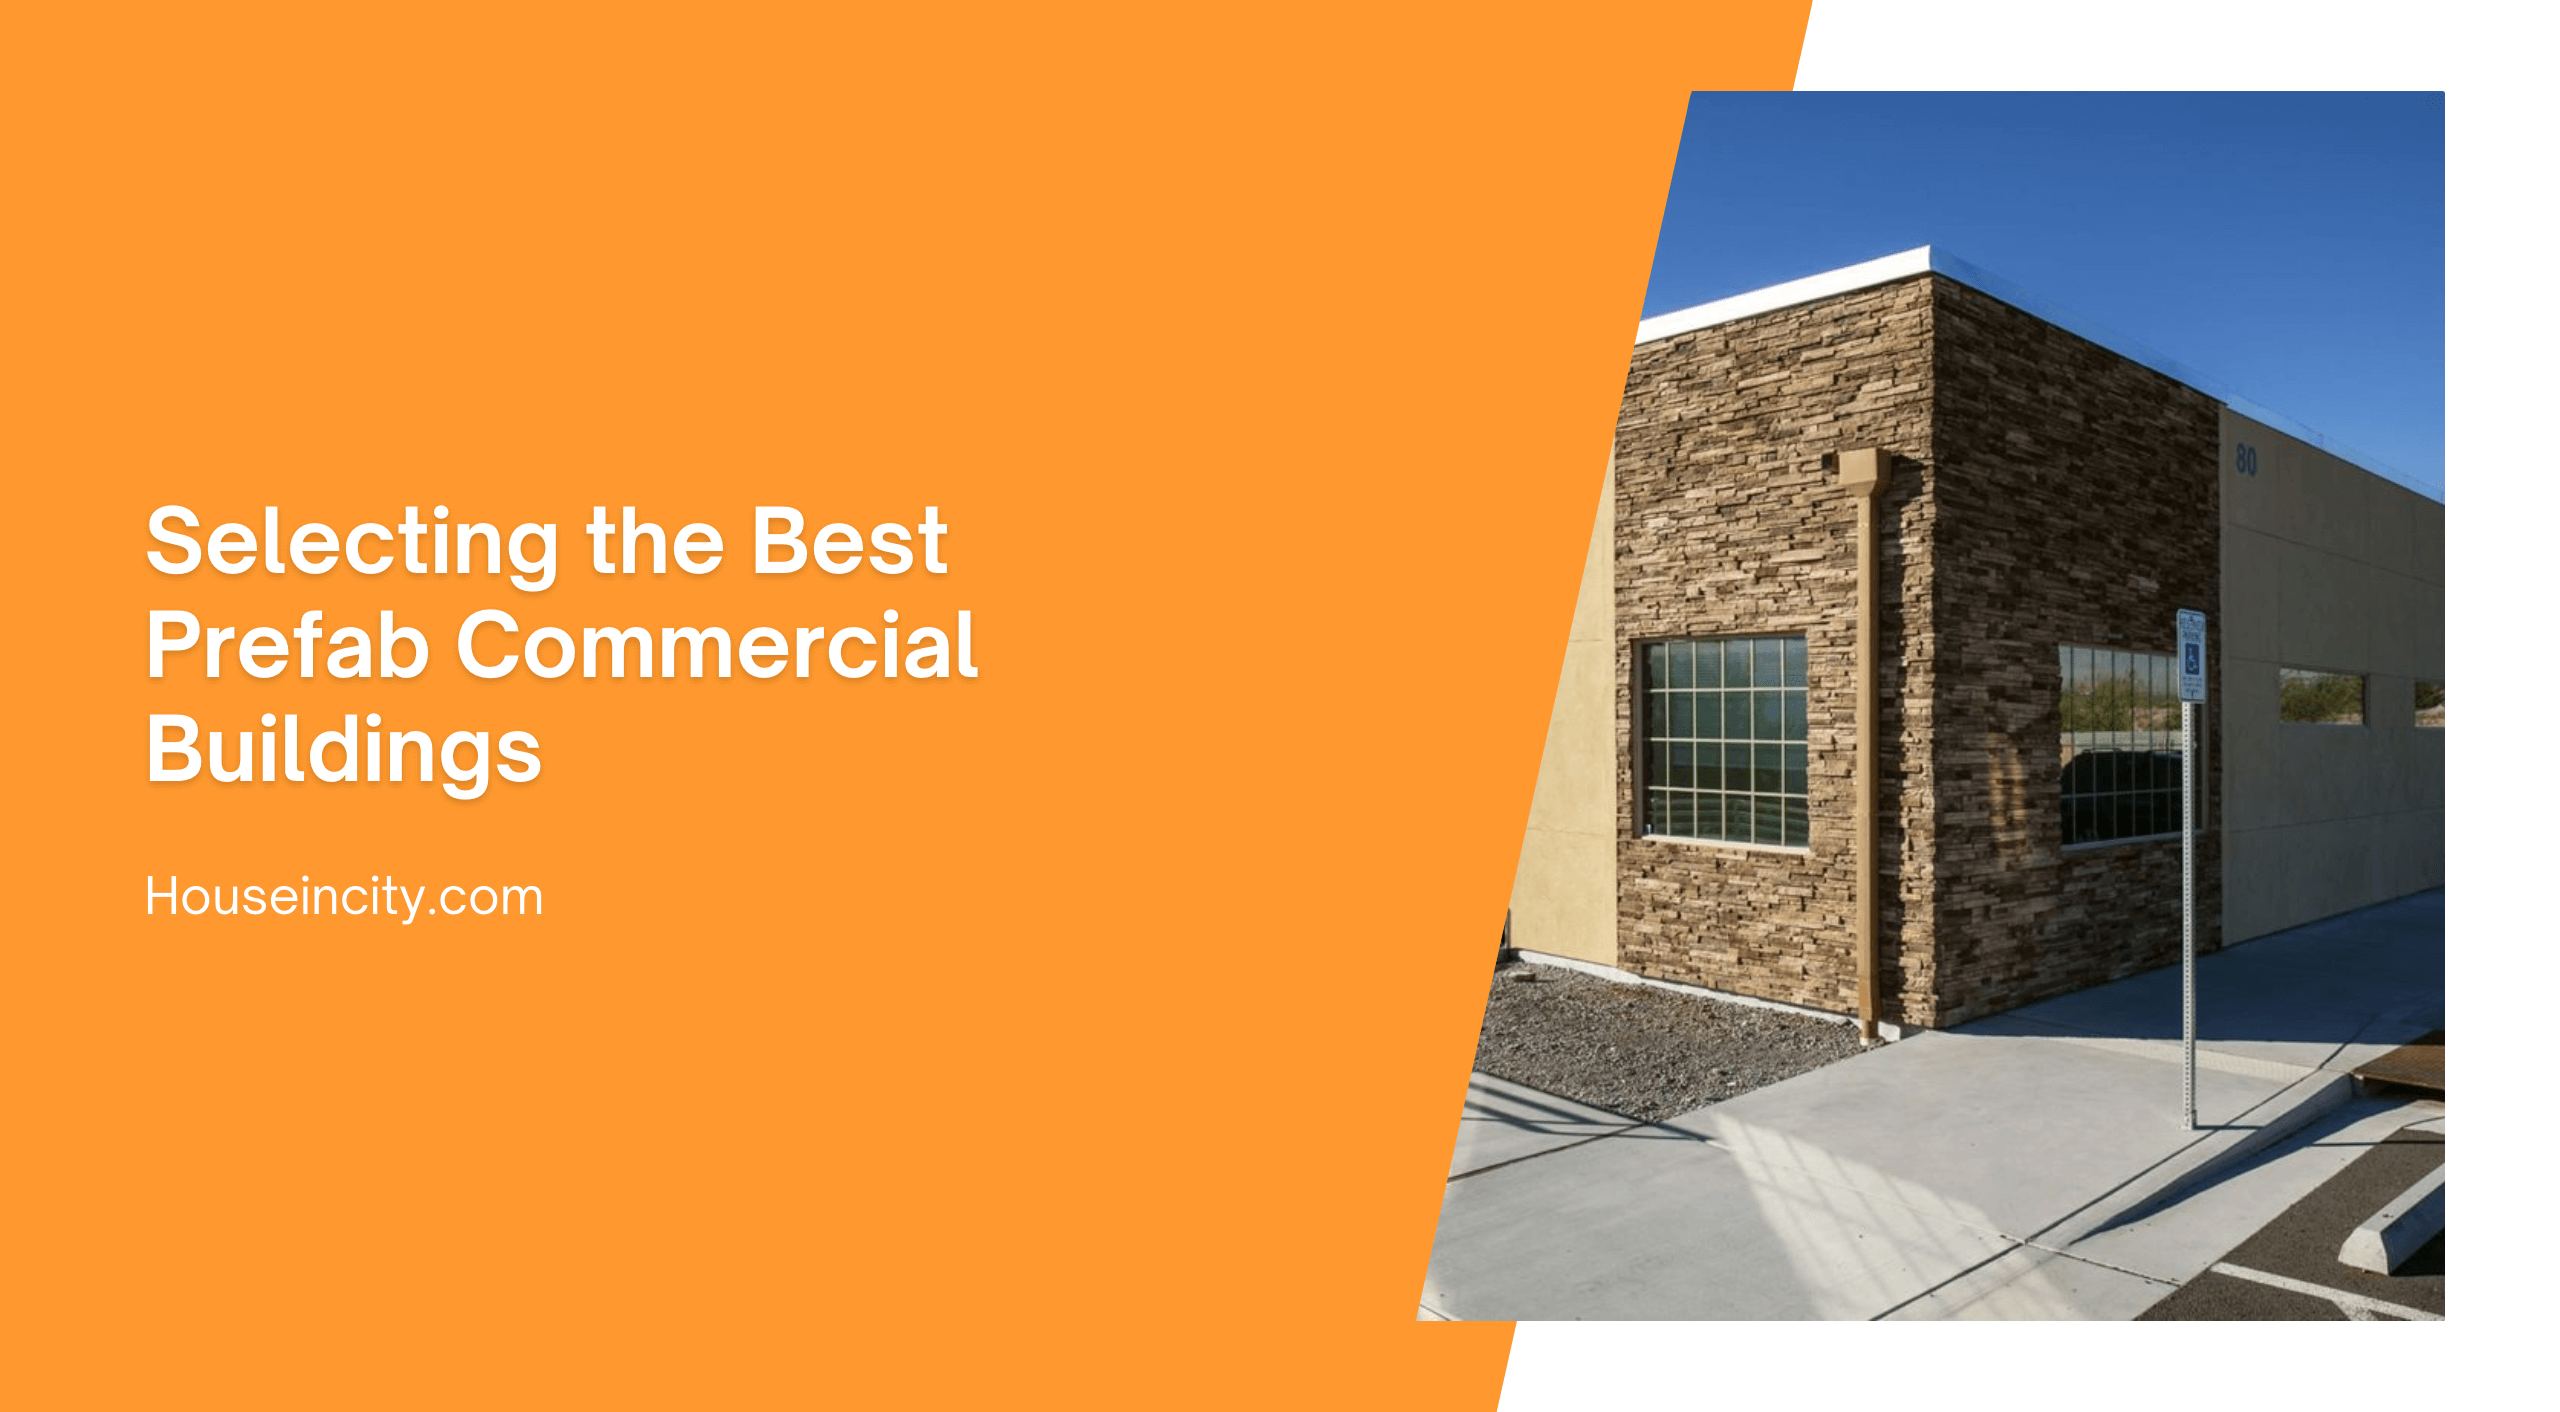 Selecting the Best Prefab Commercial Buildings